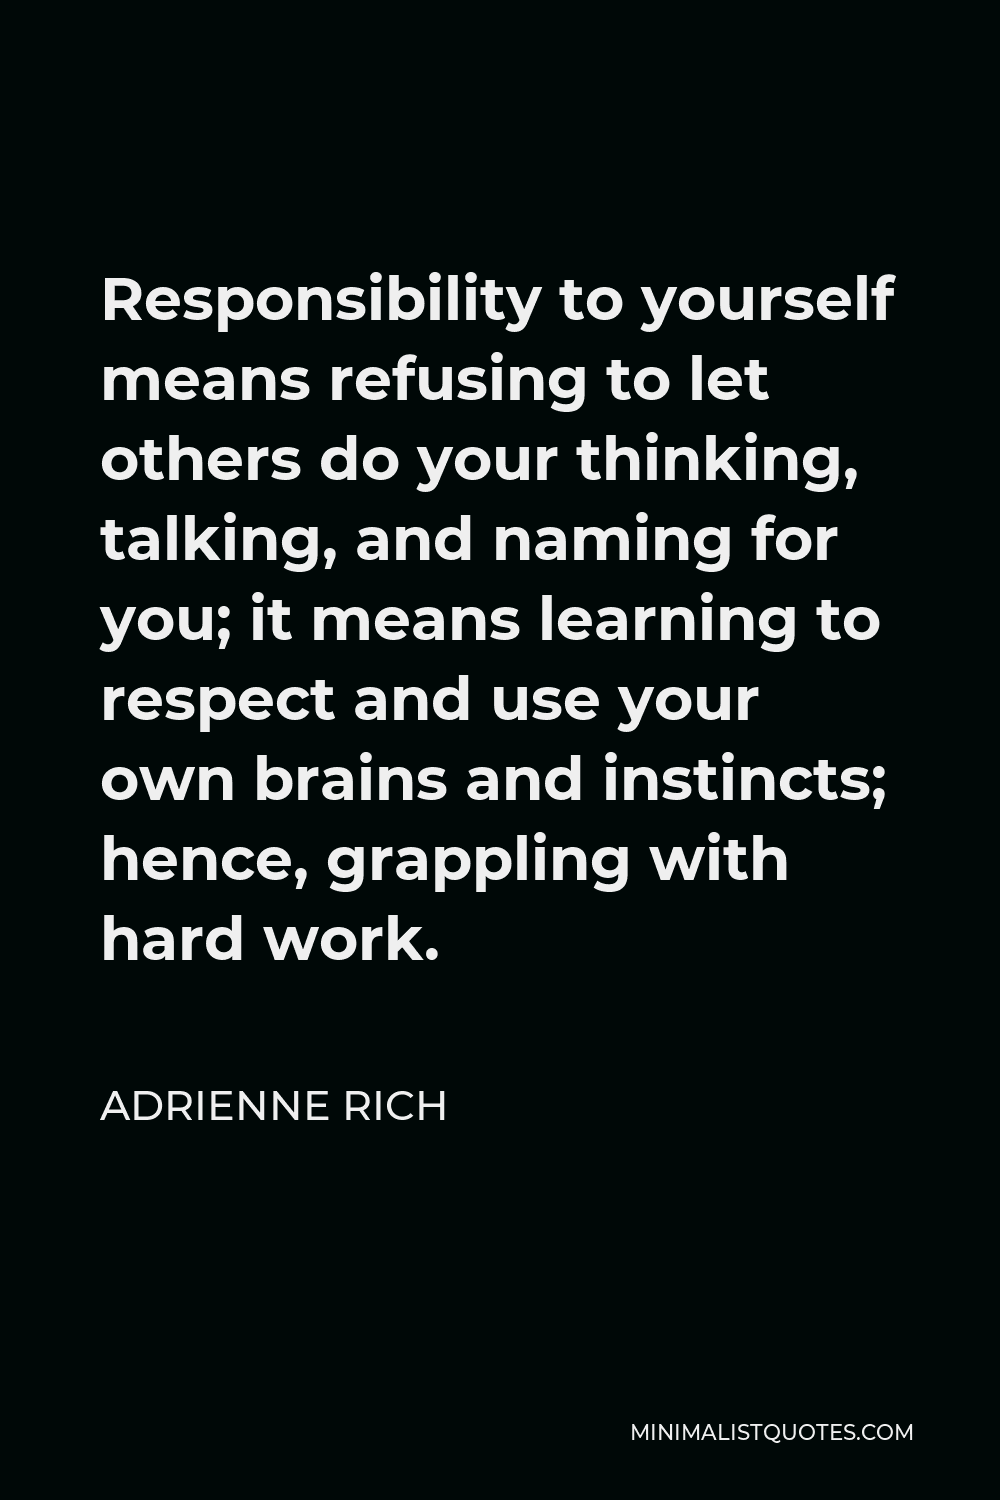 Adrienne Rich Quote - Responsibility to yourself means refusing to let others do your thinking, talking, and naming for you; it means learning to respect and use your own brains and instincts; hence, grappling with hard work.